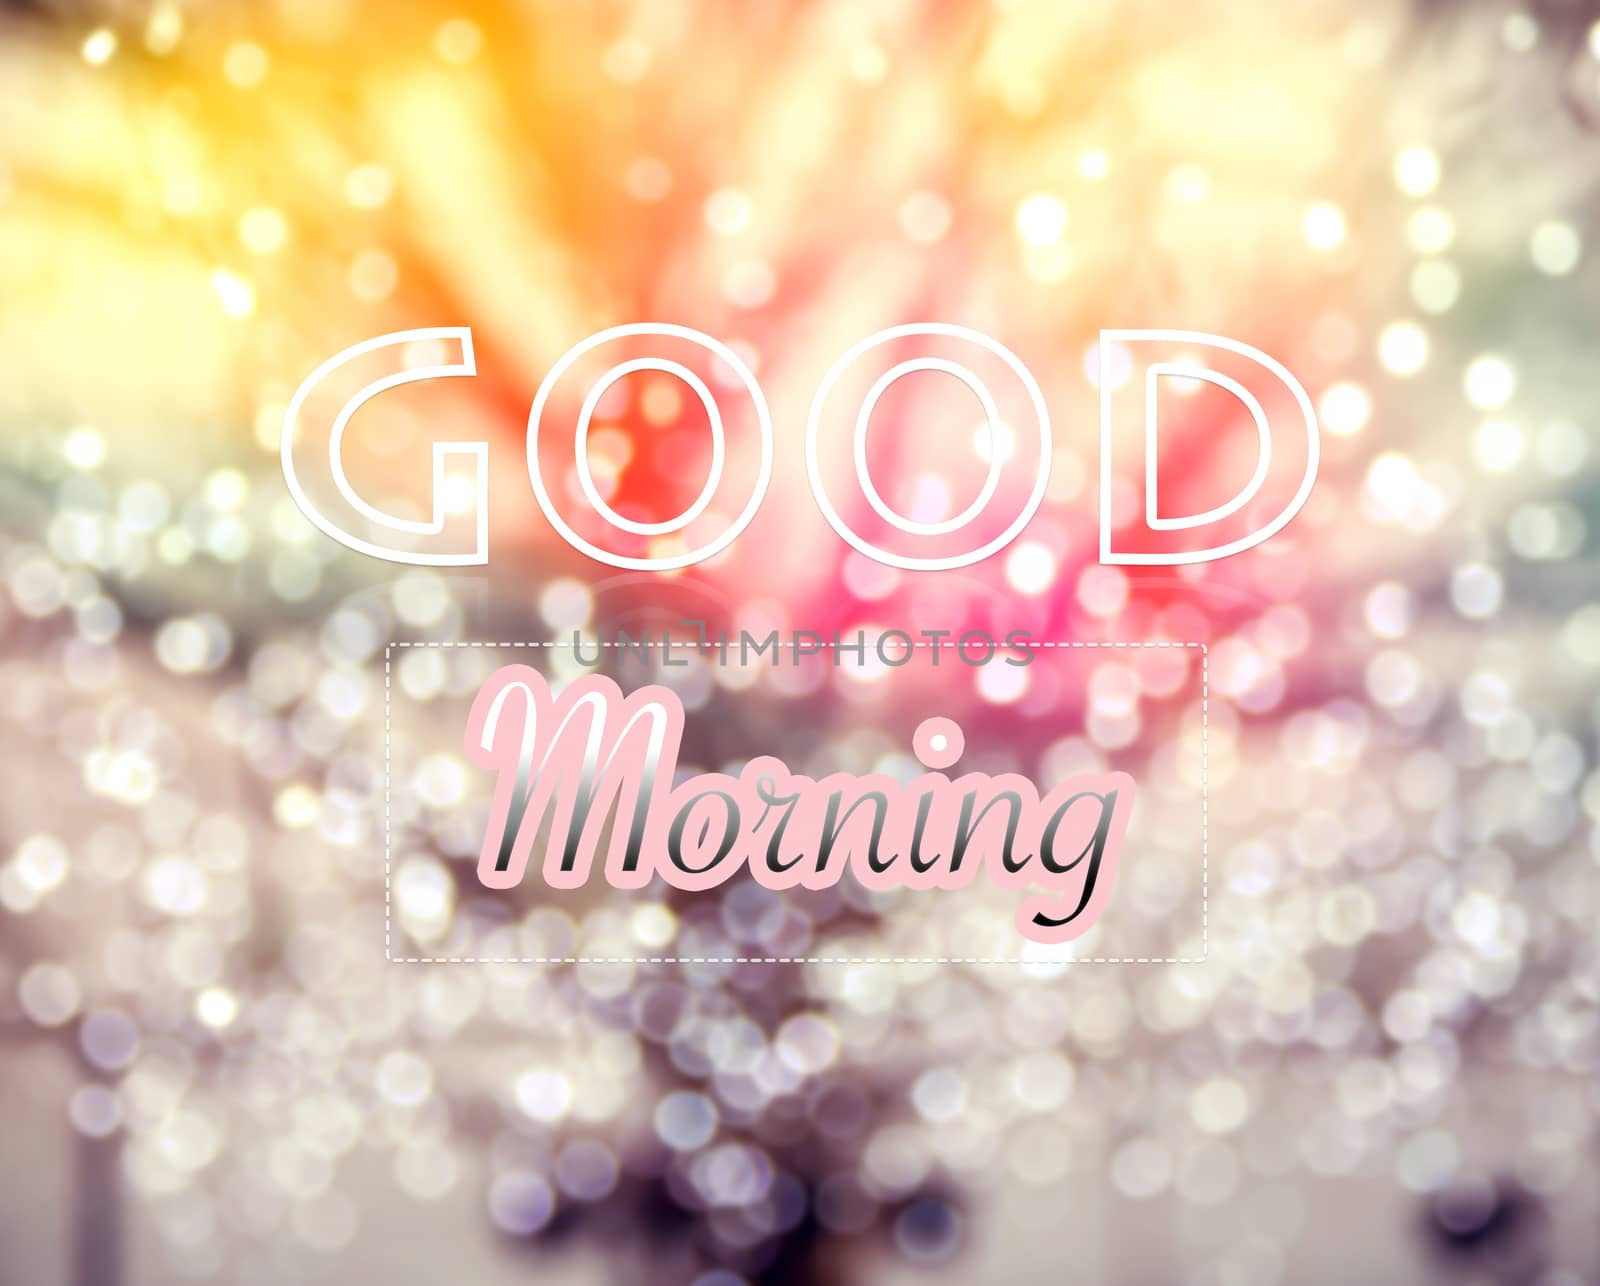 Good Morning typographic word on  winter tree and glitter bokeh lights background, vintage and retro style image